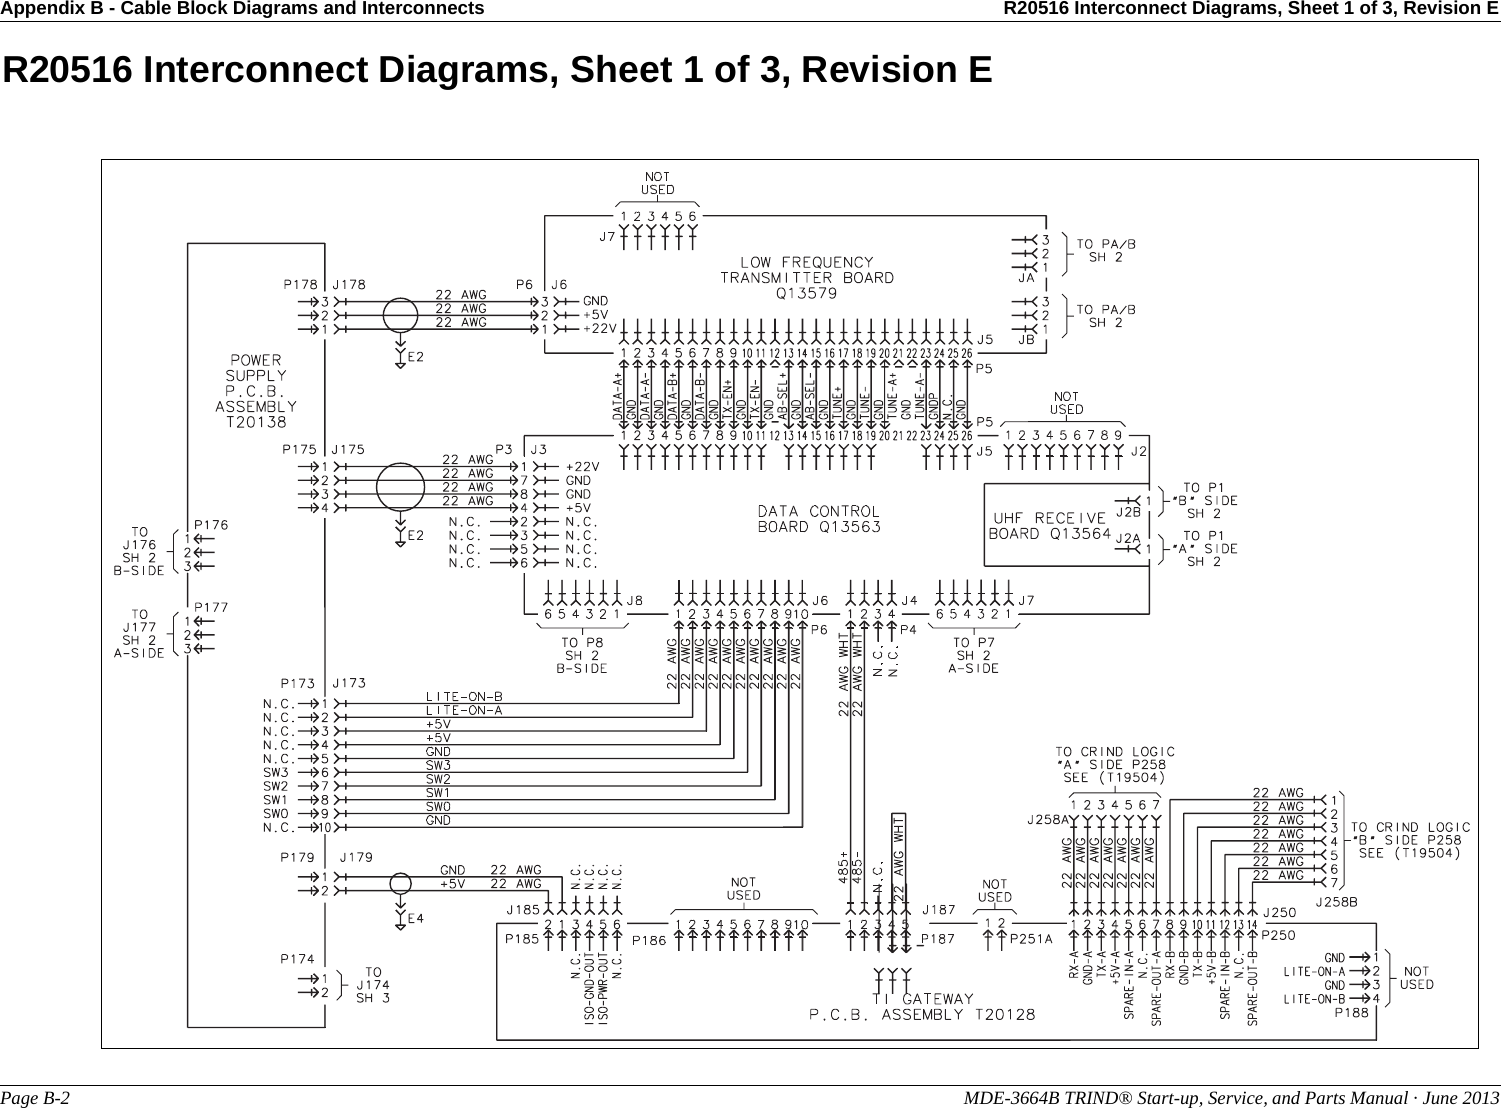 Appendix B - Cable Block Diagrams and Interconnects R20516 Interconnect Diagrams, Sheet 1 of 3, Revision EPage B-2                                                                                                               MDE-3664B TRIND® Start-up, Service, and Parts Manual · June 2013R20516 Interconnect Diagrams, Sheet 1 of 3, Revision E